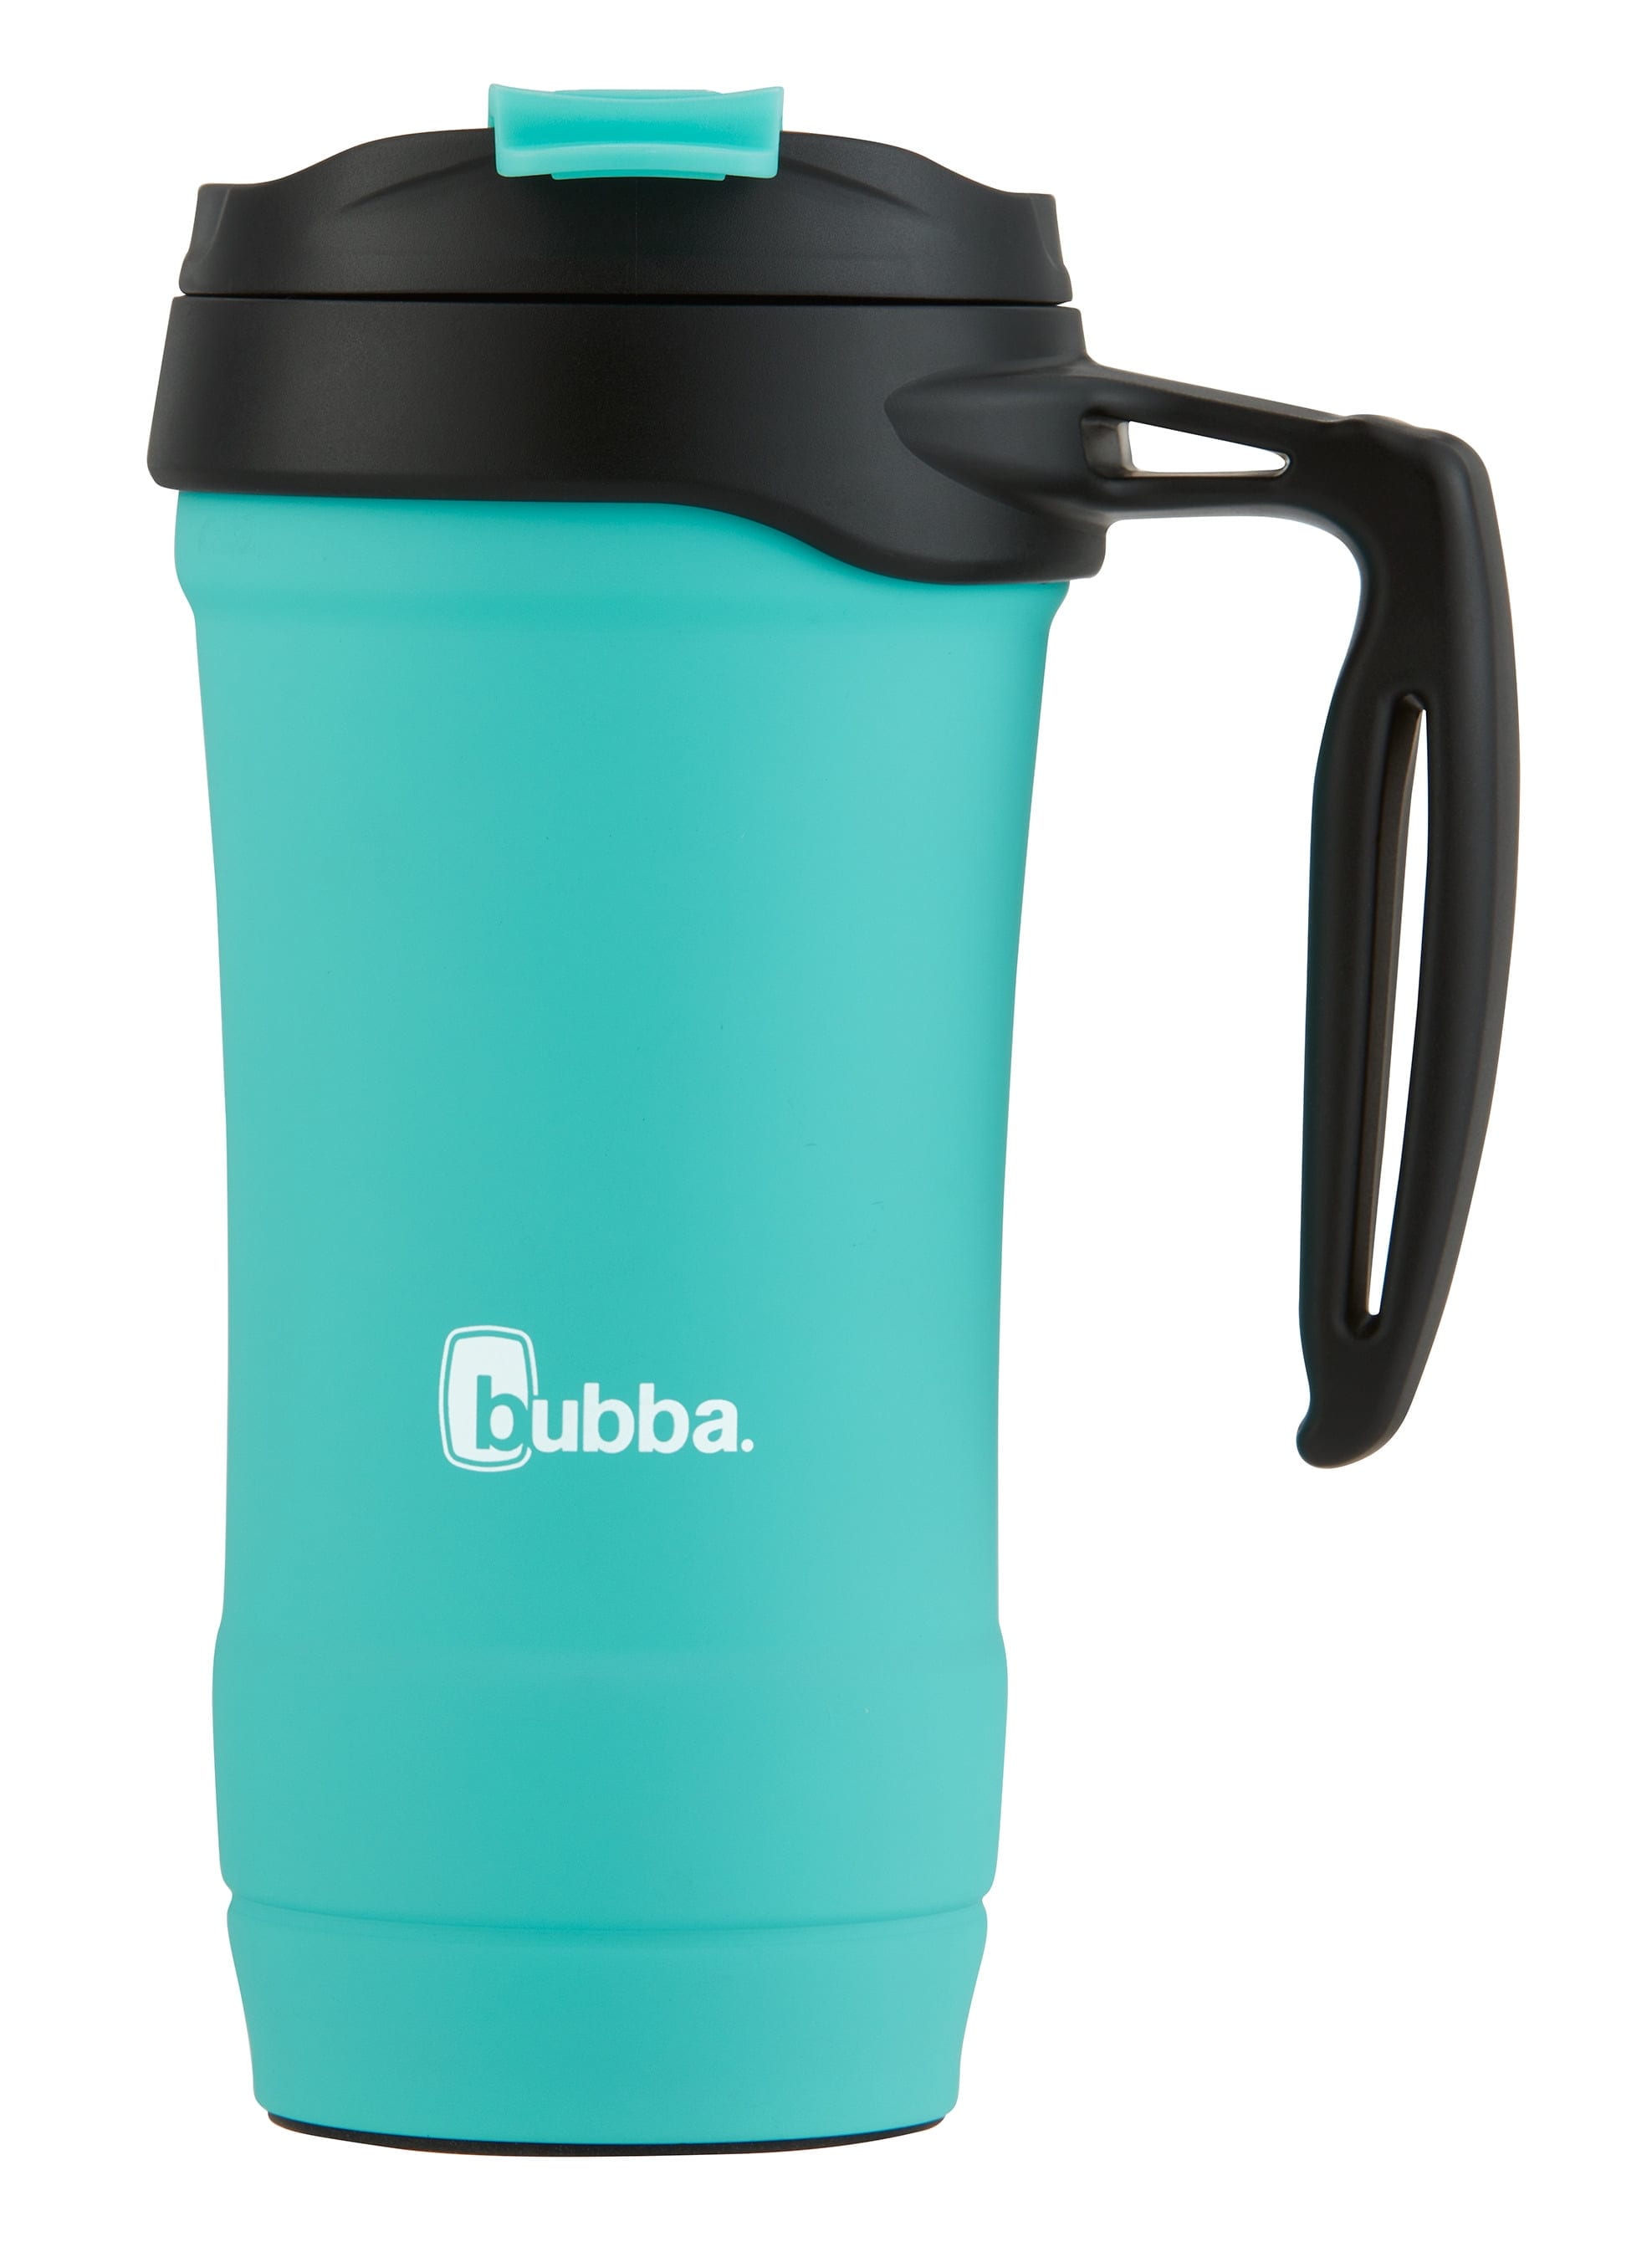 Bubba Envy S Stainless Steel Tumbler with Straw and Bumper Rubberized in Teal, 24 fl oz., Size: 24 oz